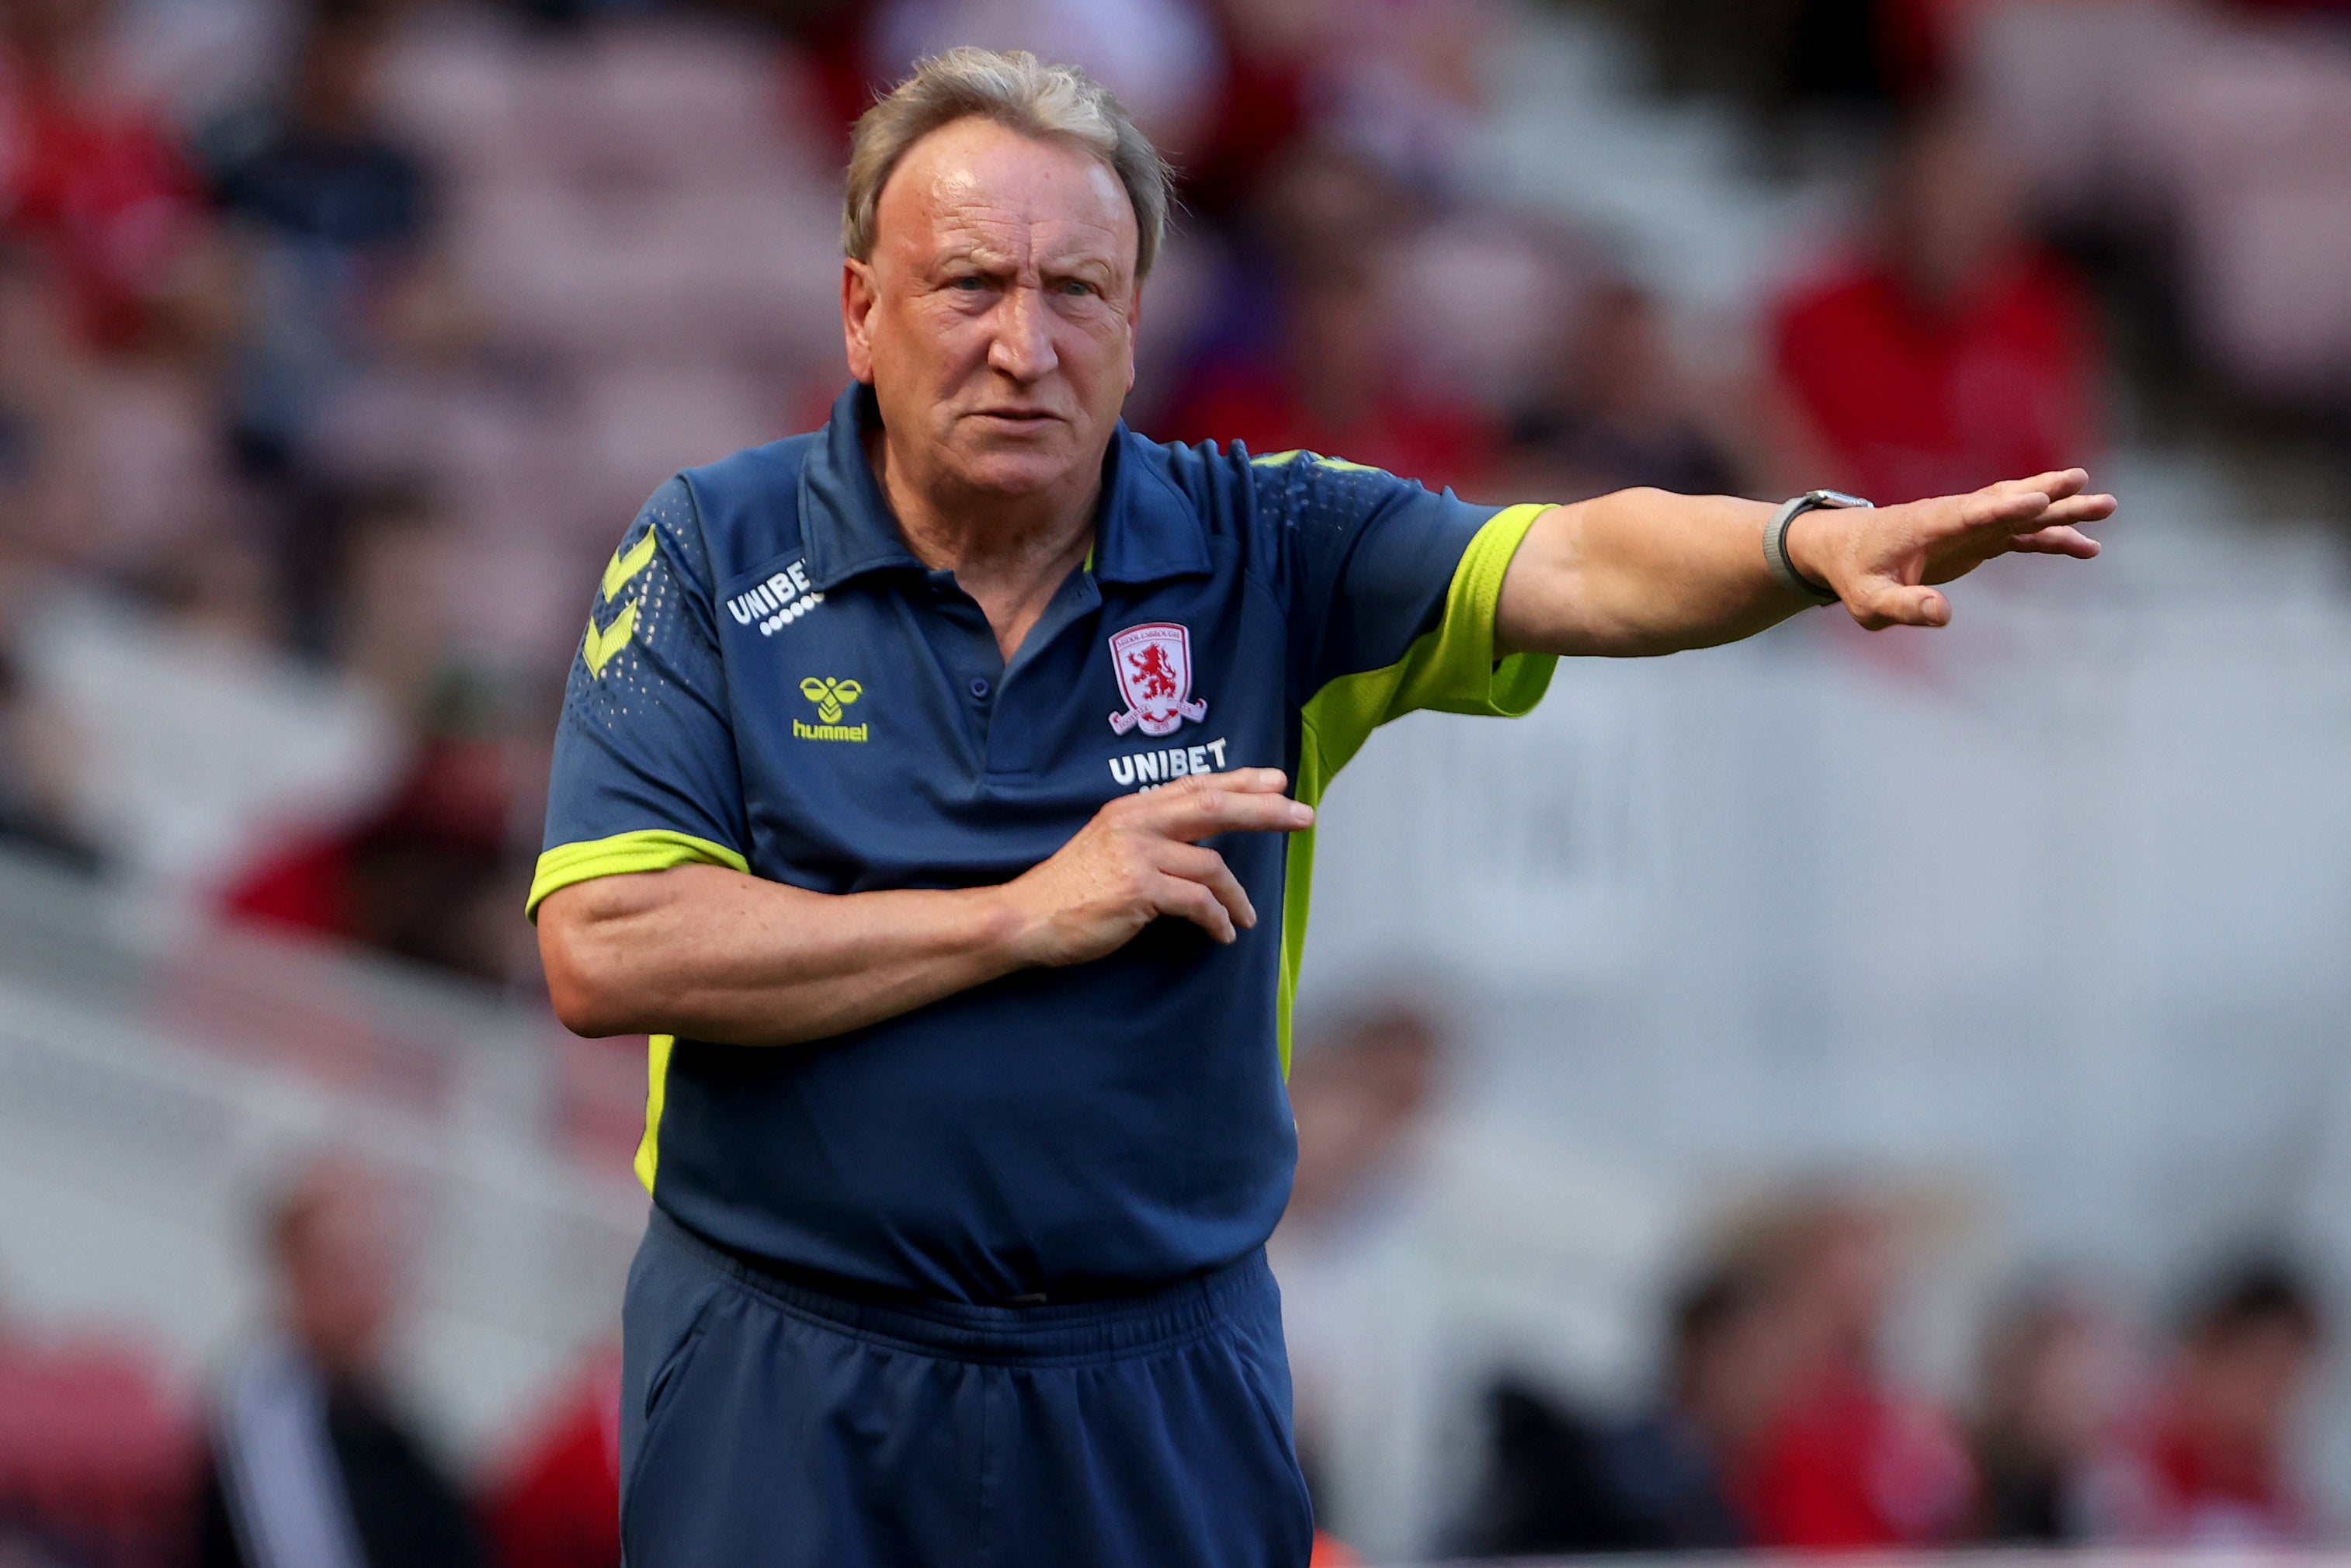 Neil Warnock was most recently in charge of Middlesbrough